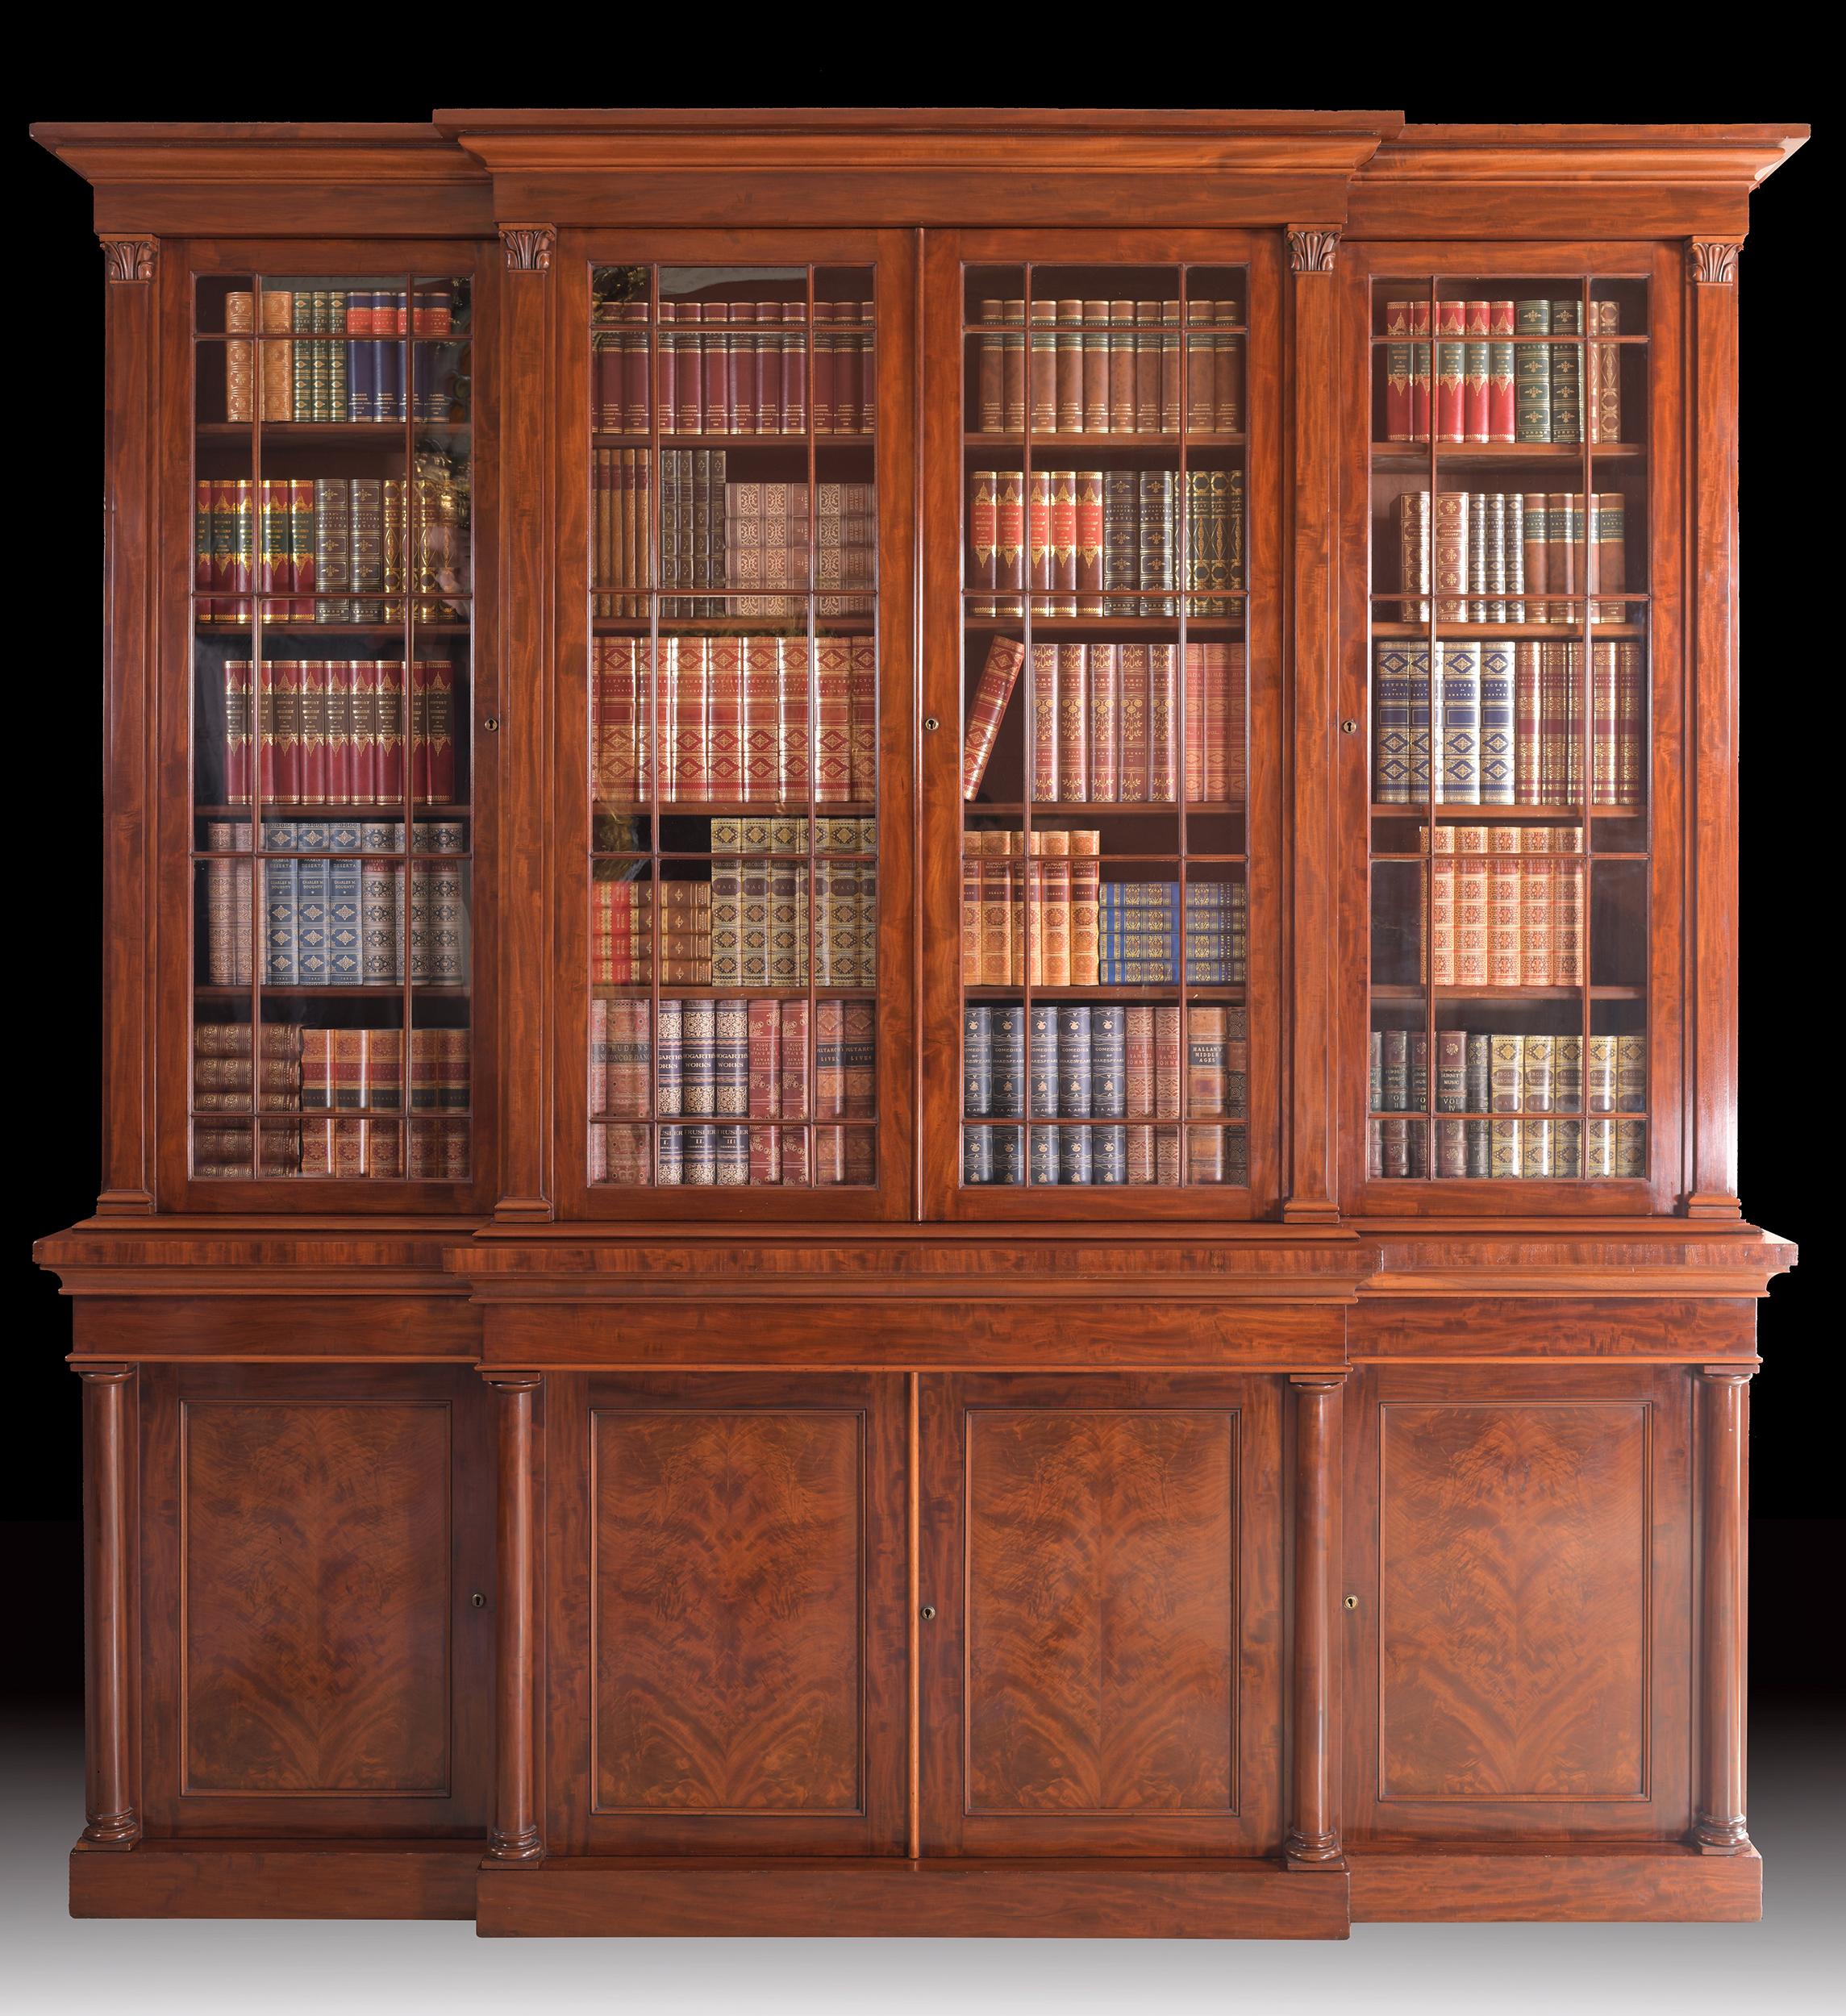 Mahogany 19th Century English Regency Breakfront Bookcase Attributed to Gillows Lancaster For Sale